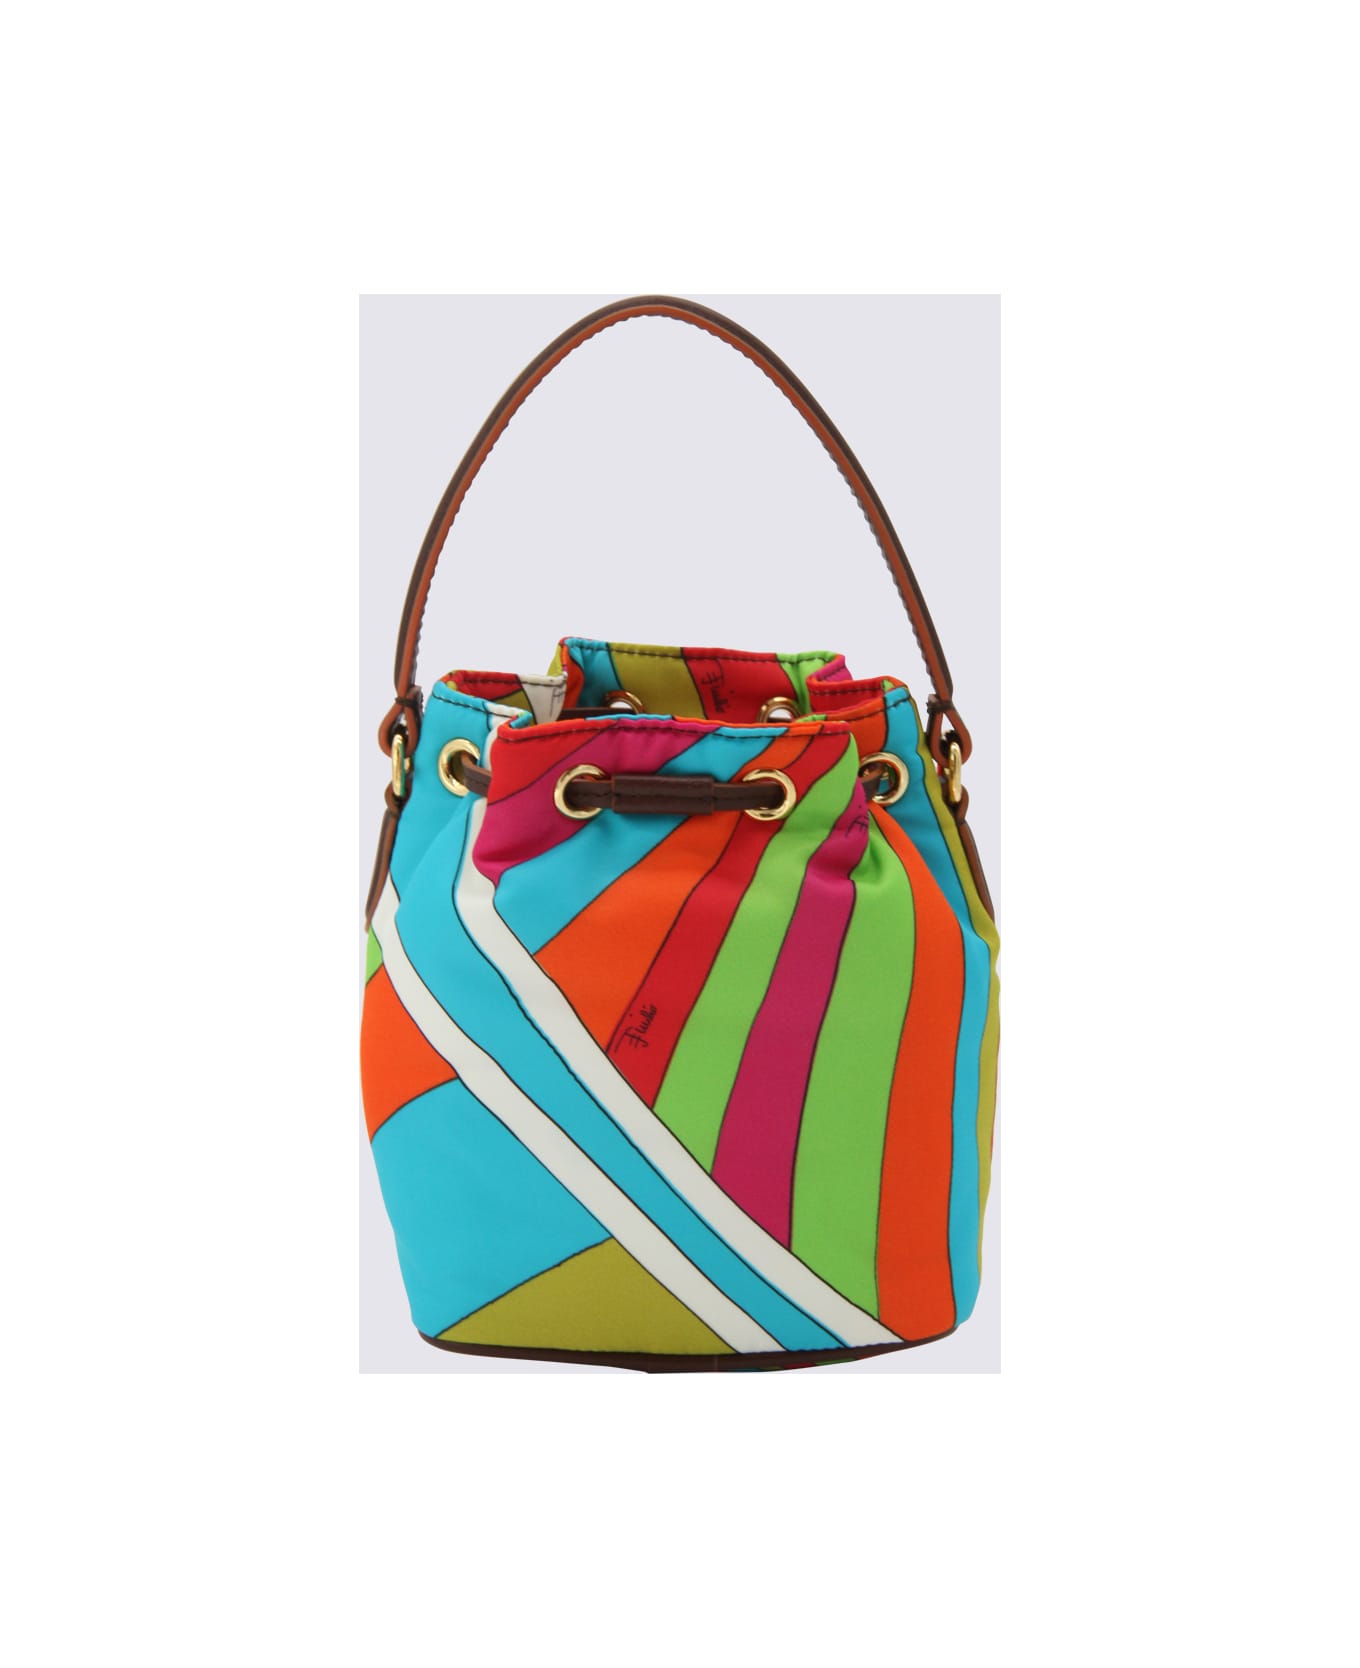 Pucci Multicolor Yummy Bucket Bag - BLUE/YELLOW クラッチバッグ